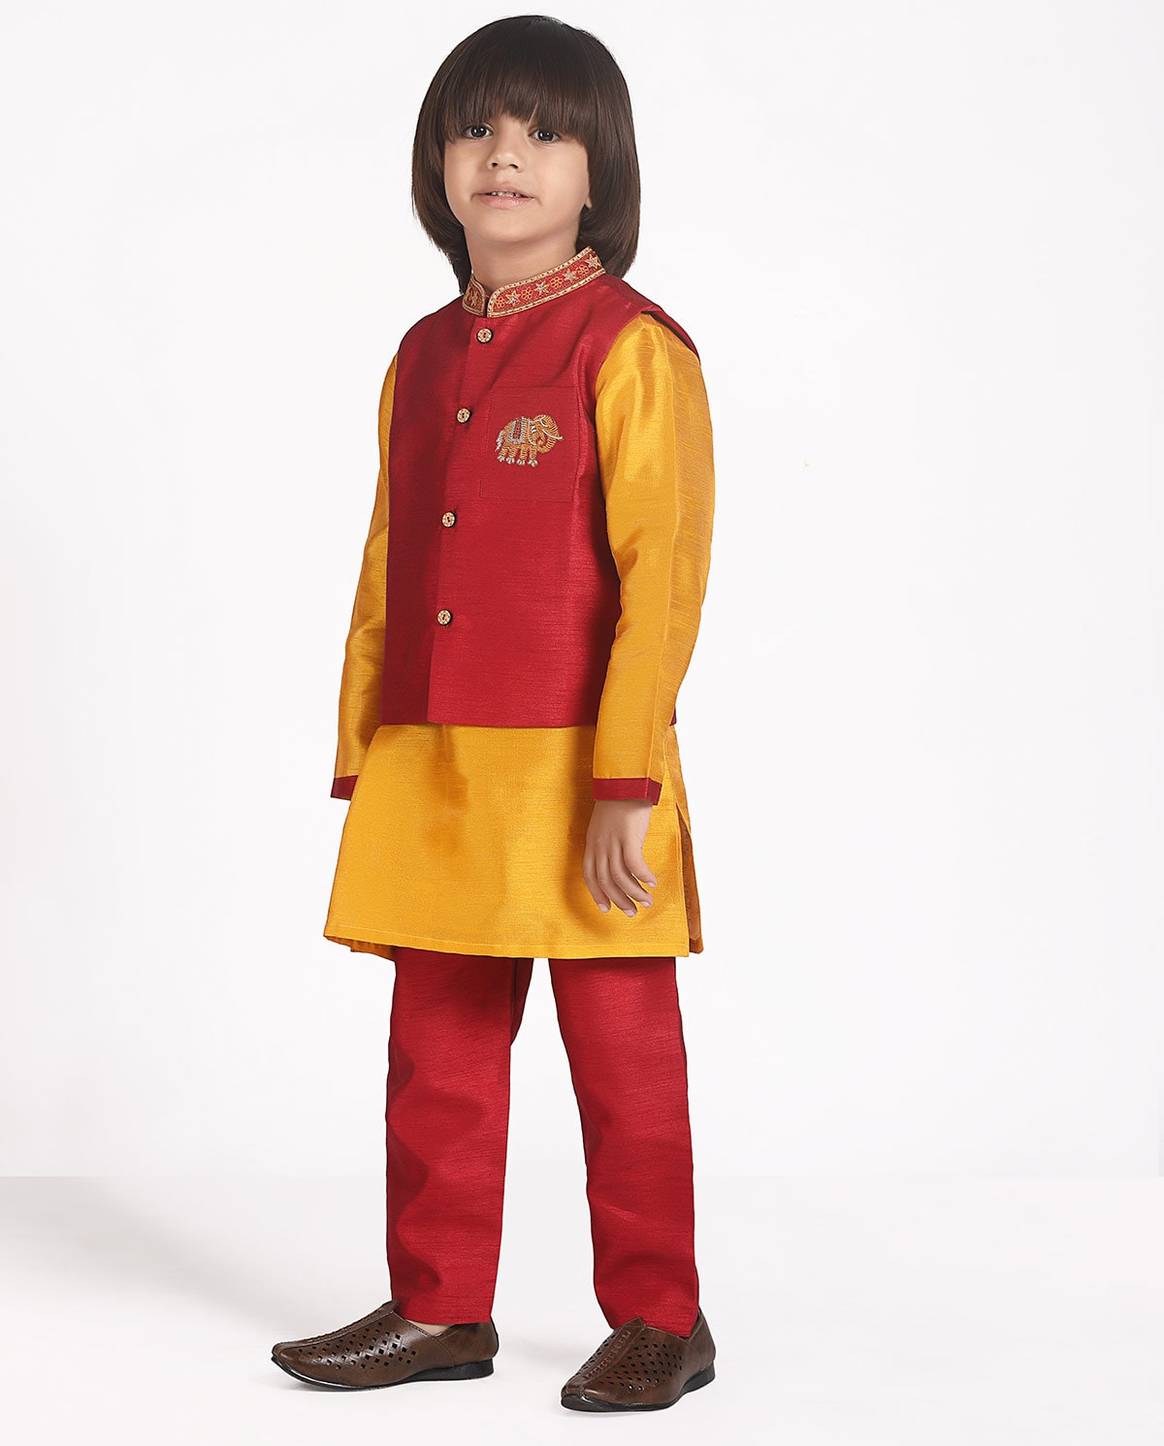 Toonz Retail launches new festive collection for kids'